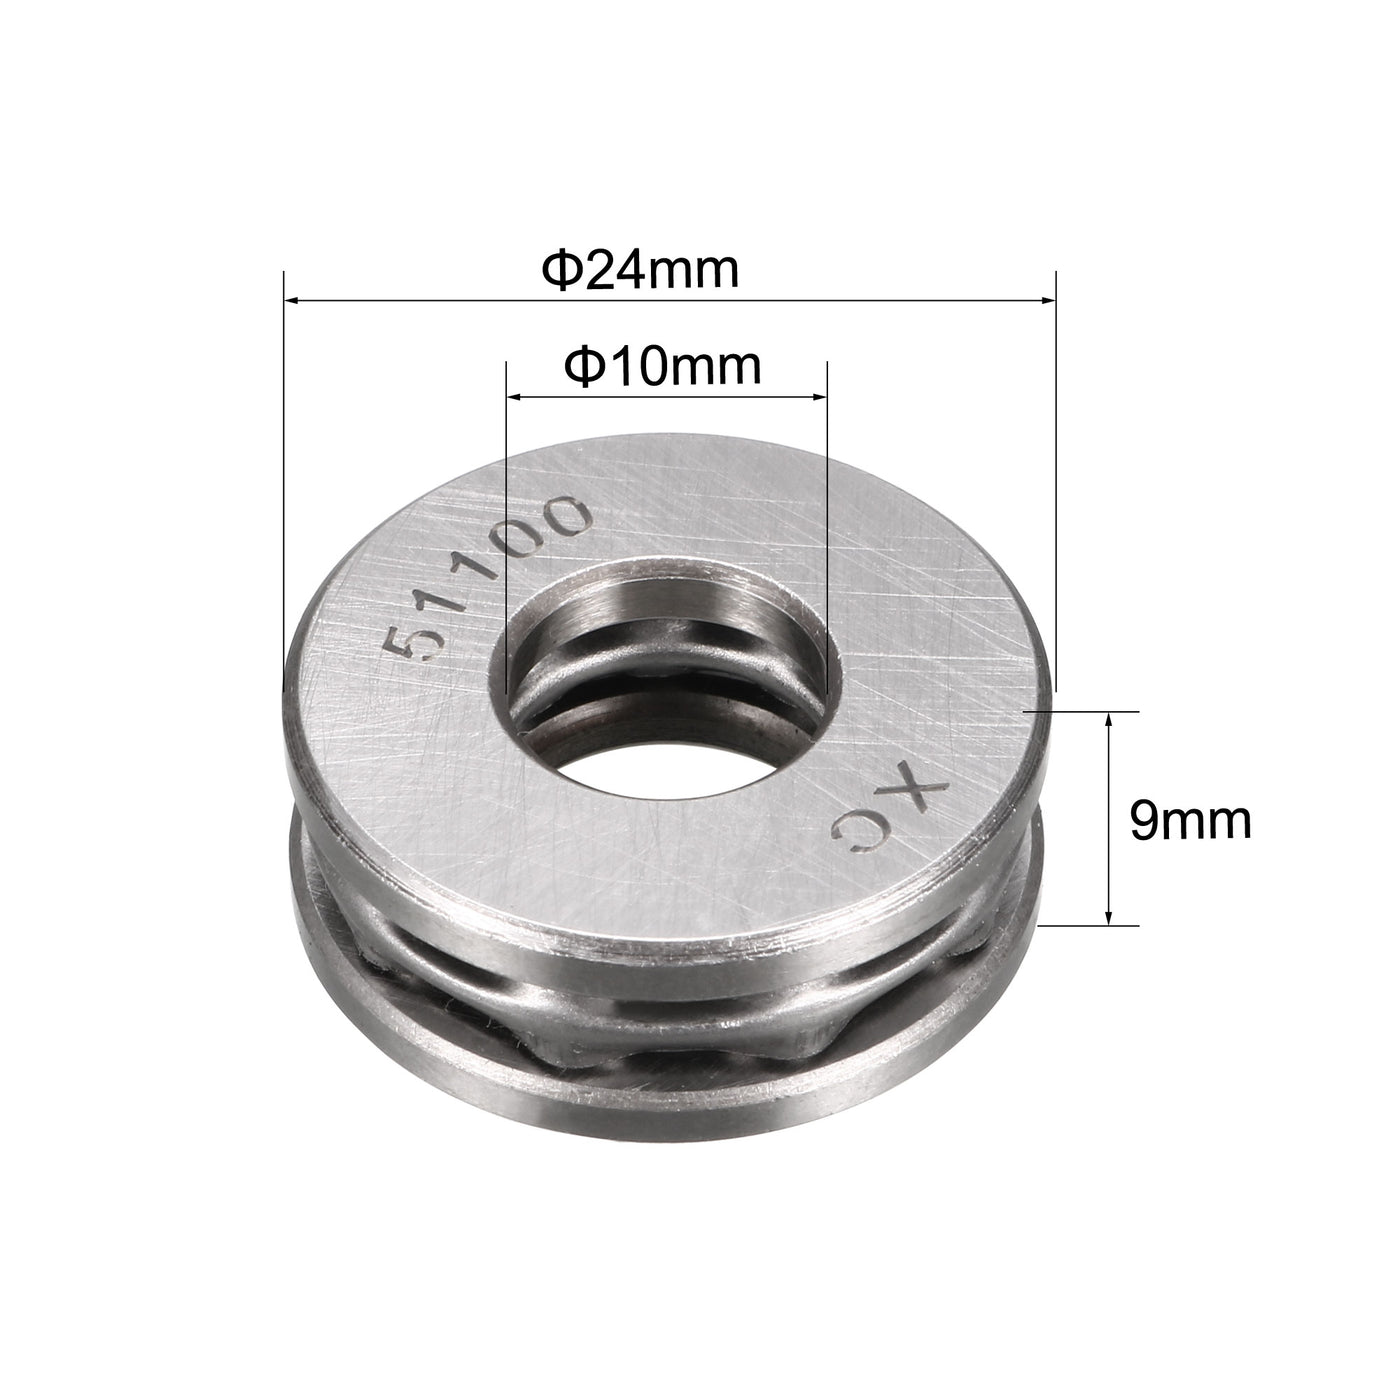 uxcell Uxcell 51100 Miniature Thrust Ball Bearing 10x24x9mm Chrome Steel with Washer 10Pcs